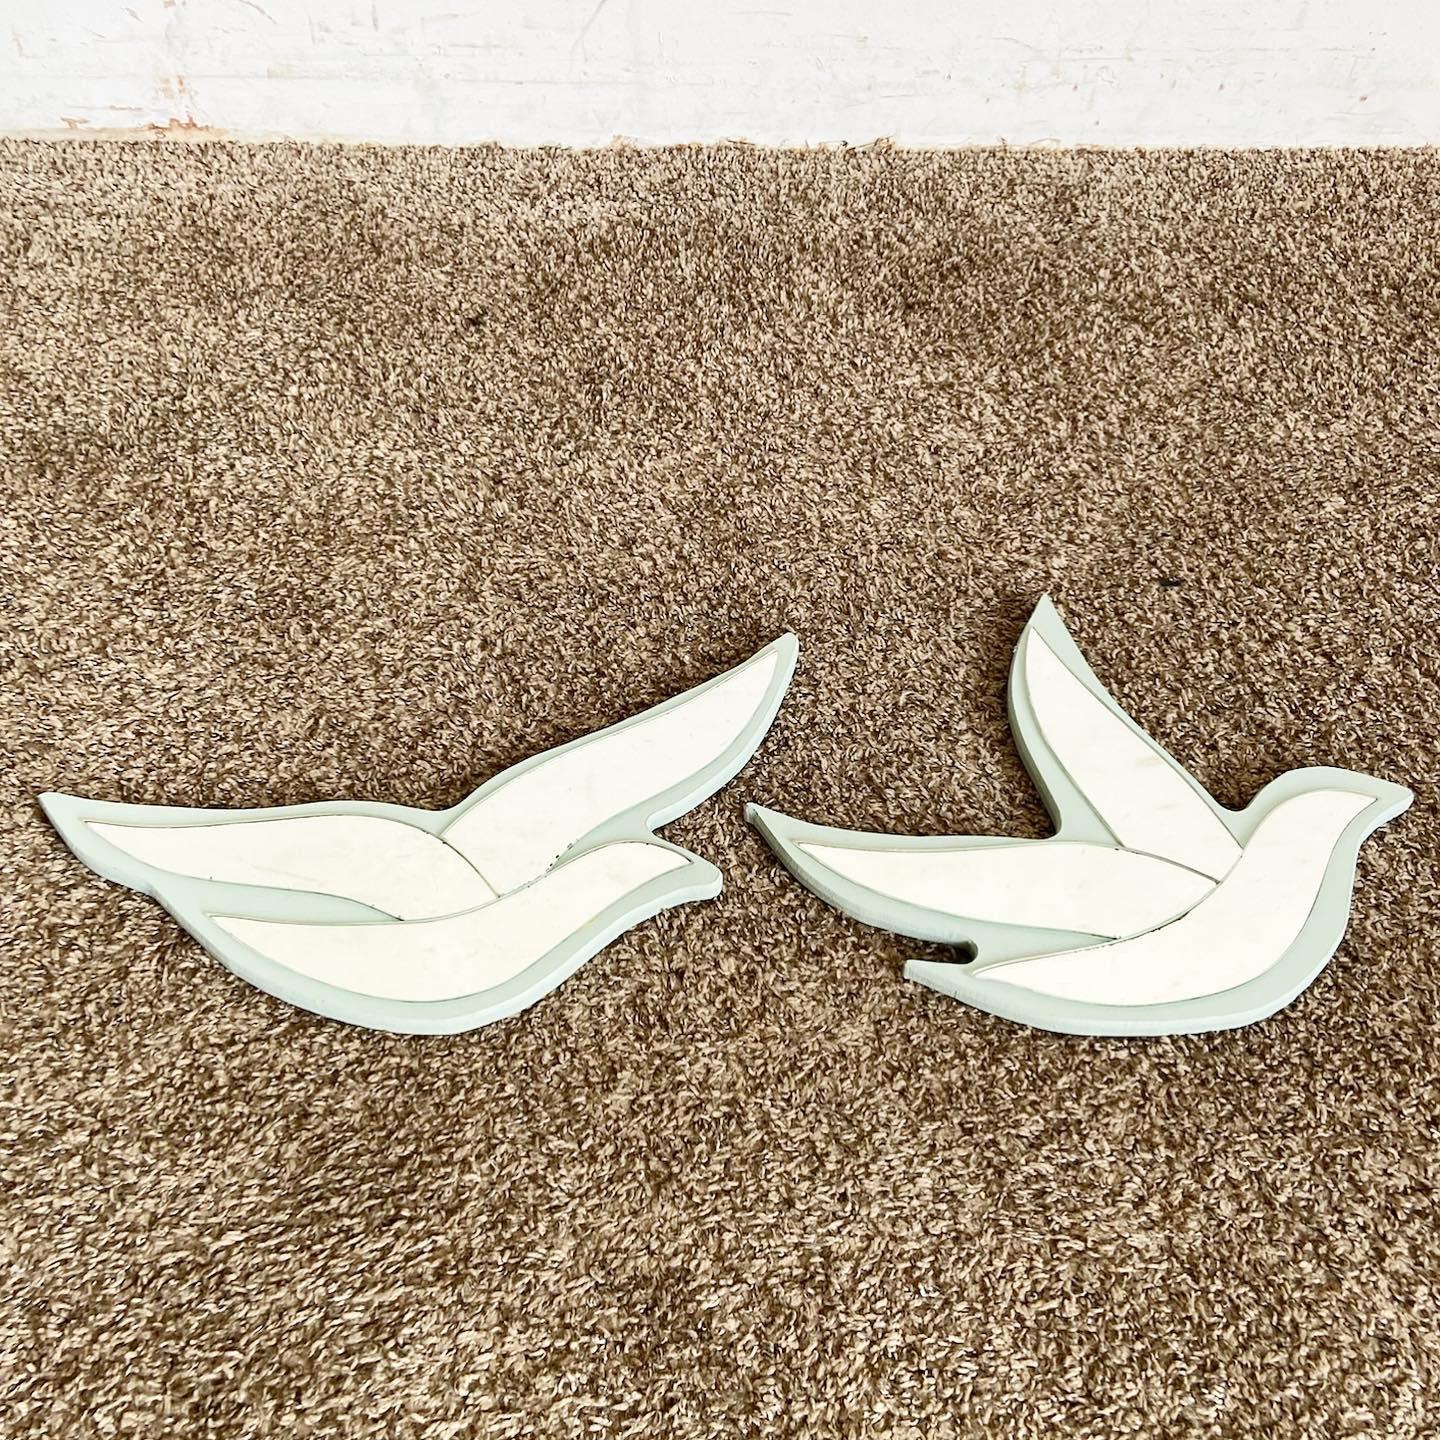 Dive into the world of Postmodern design with this Mirrored Birds Wall Art Pair. Each piece showcases a delicate baby blue bird, adorned with three mirrored segments that play with light and reflection. Beyond their aesthetic appeal, these birds